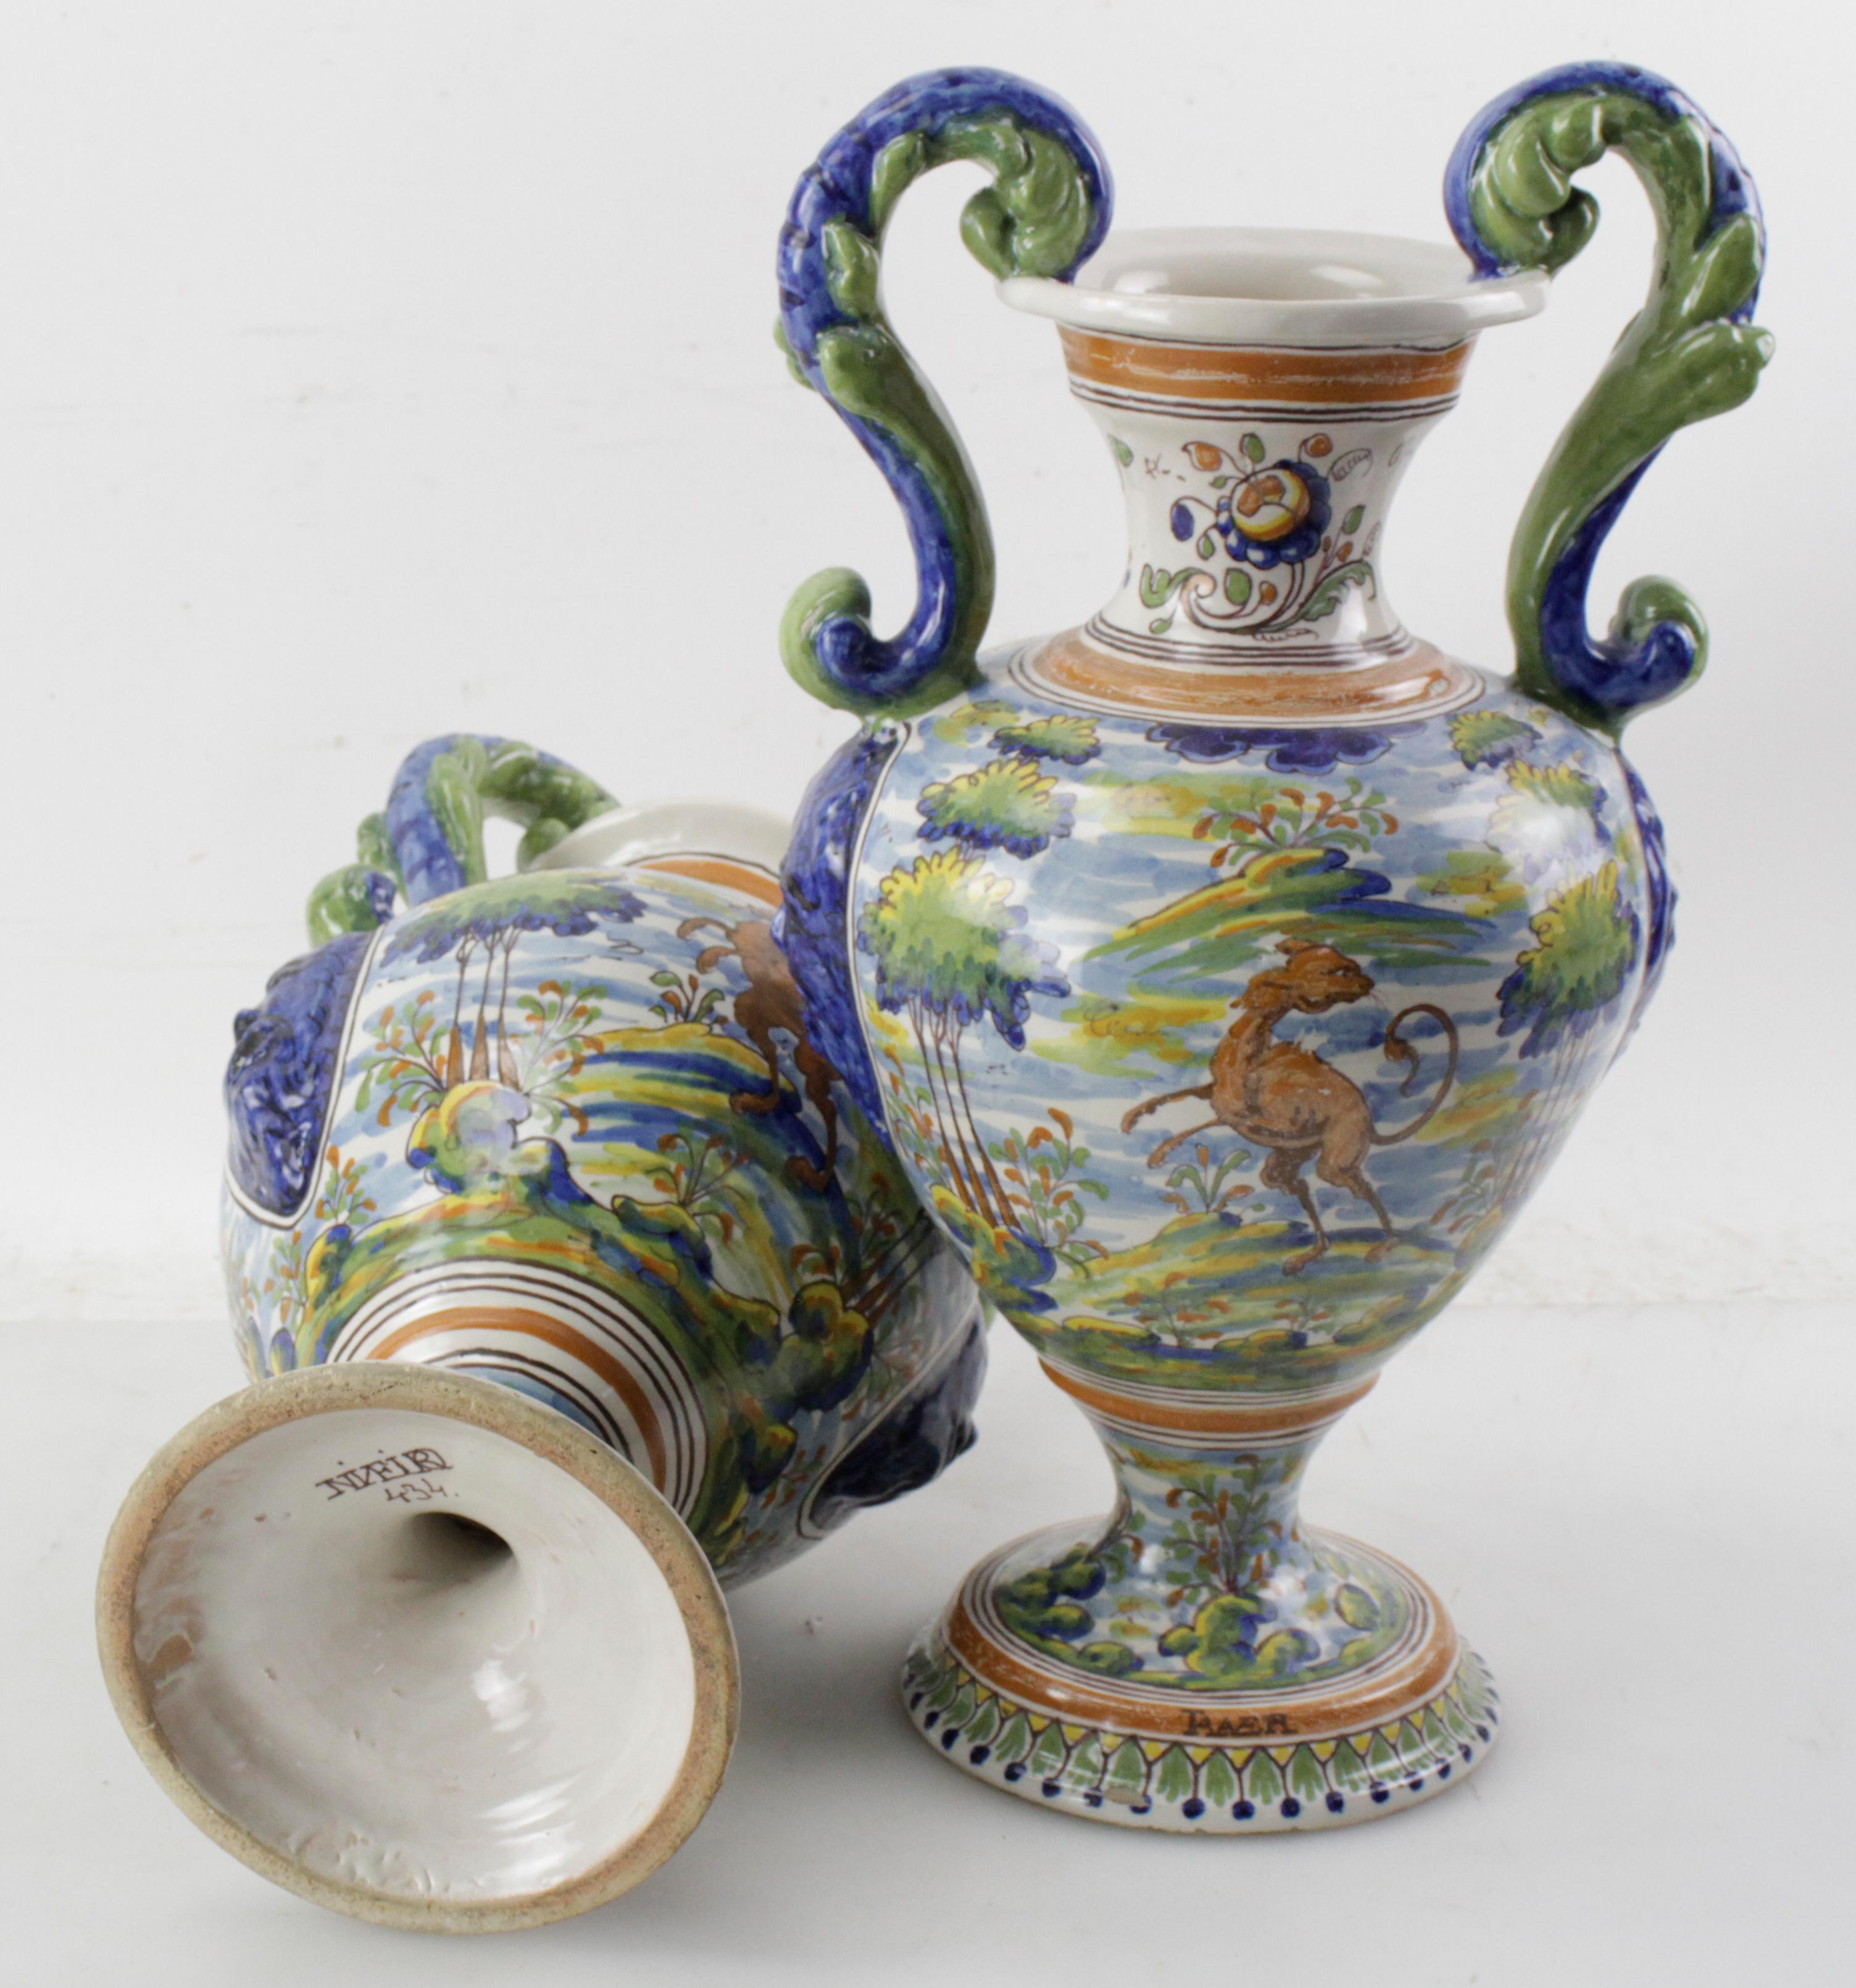 Pair of Antique Italian Majolica Italian Blue and Green Two Handled Urns  For Sale 4